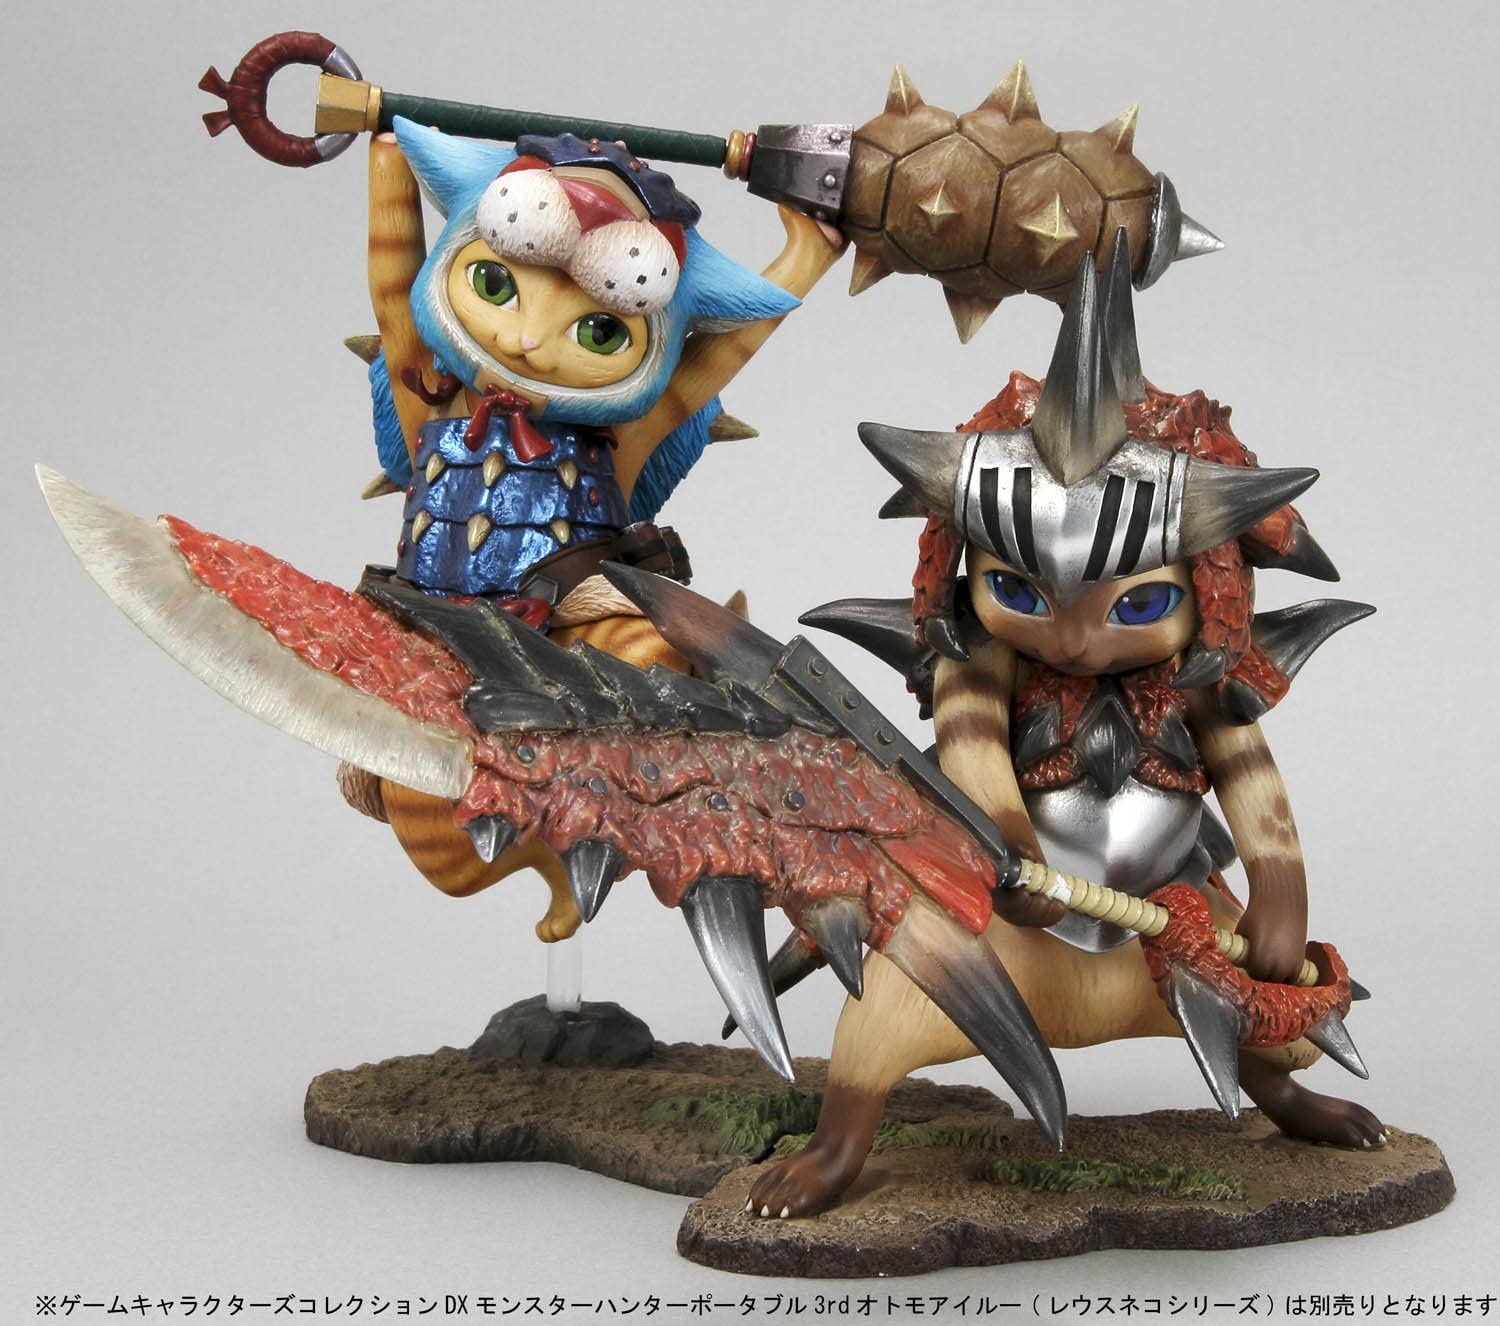 Game Characters Collection DX - Palico (F Arzuros Palico Armor) From "Monster Hunter Portable 3rd"